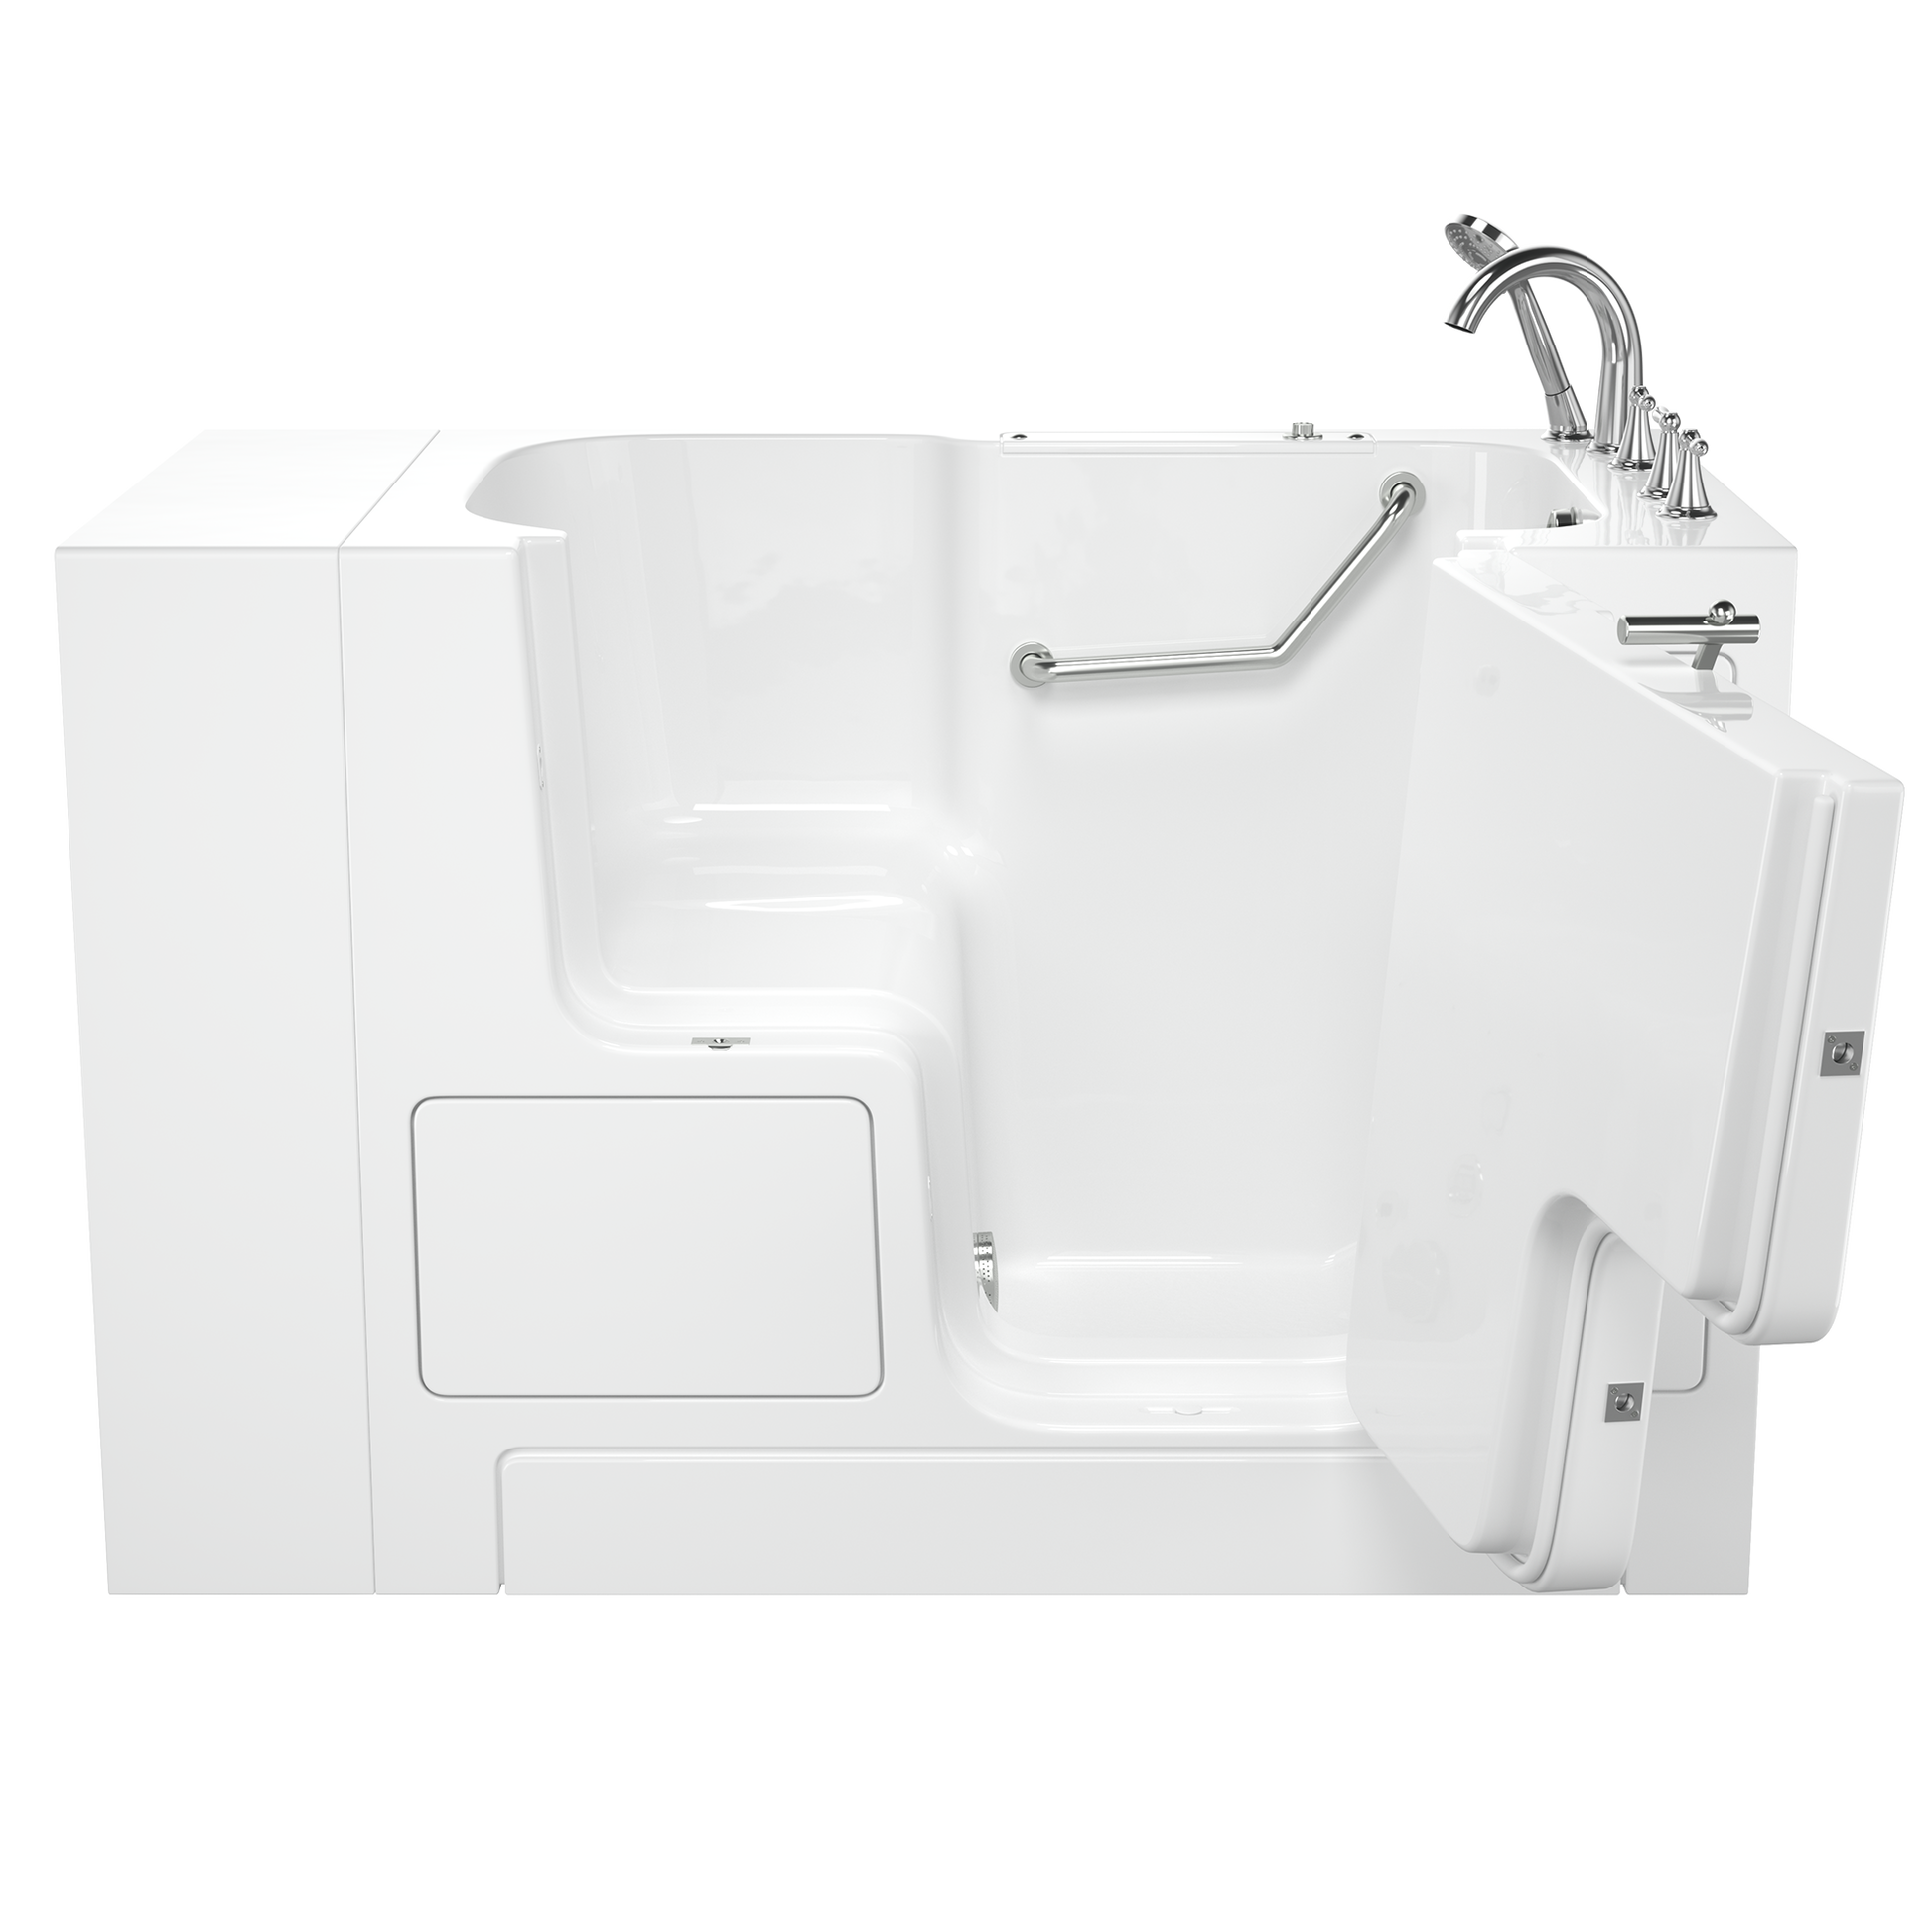 AMERICAN-STANDARD SS9OD5232RS-WH-PC, Gelcoat Premium Series 32 in. x 52 in. Outward Opening Door Walk-In Bathtub in Wib White